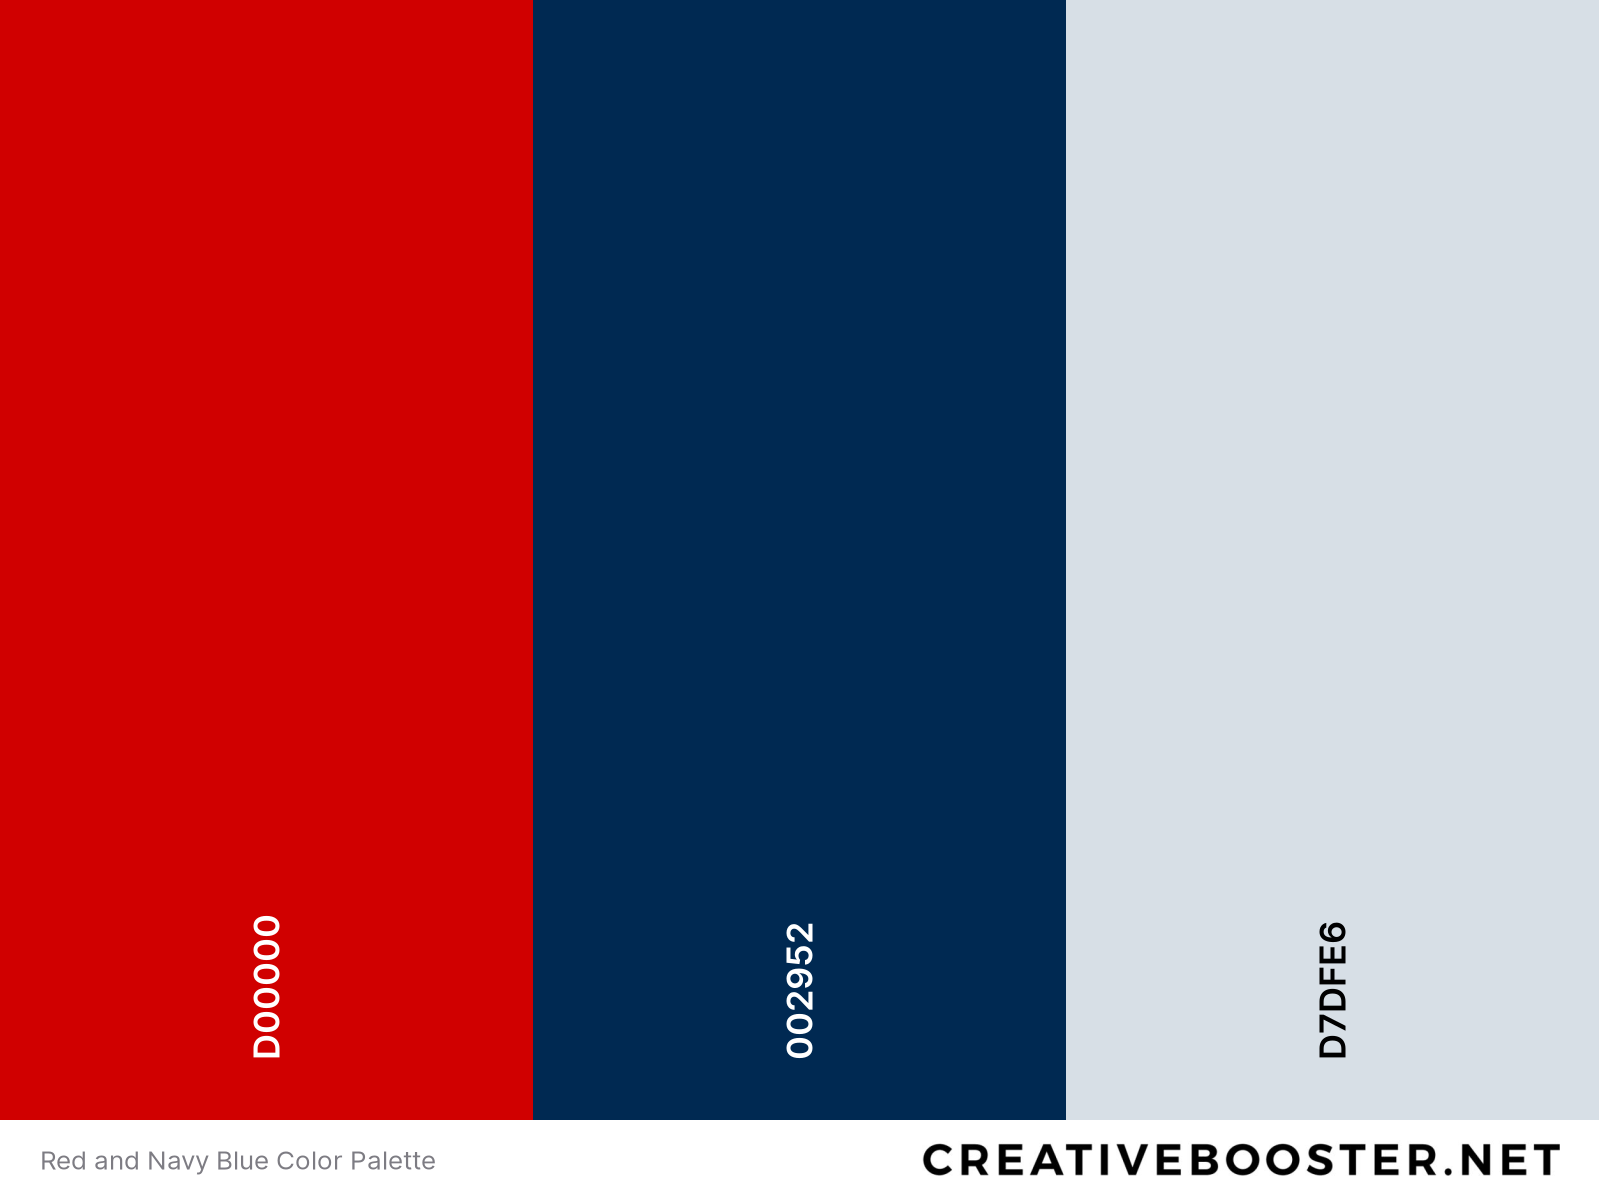 Red and Navy Blue Color Palette